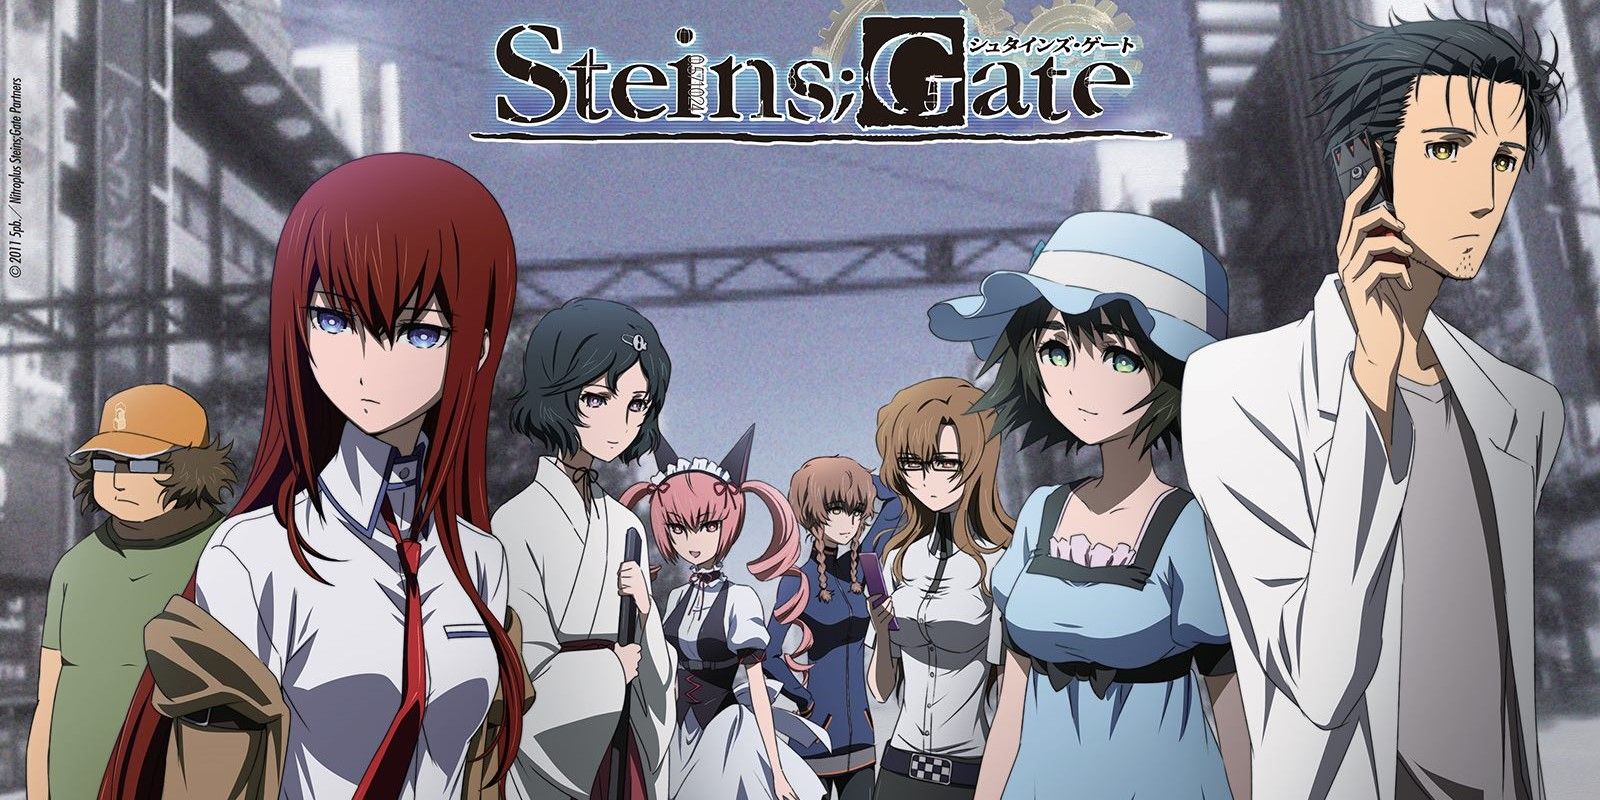 the main characters of steins;gate